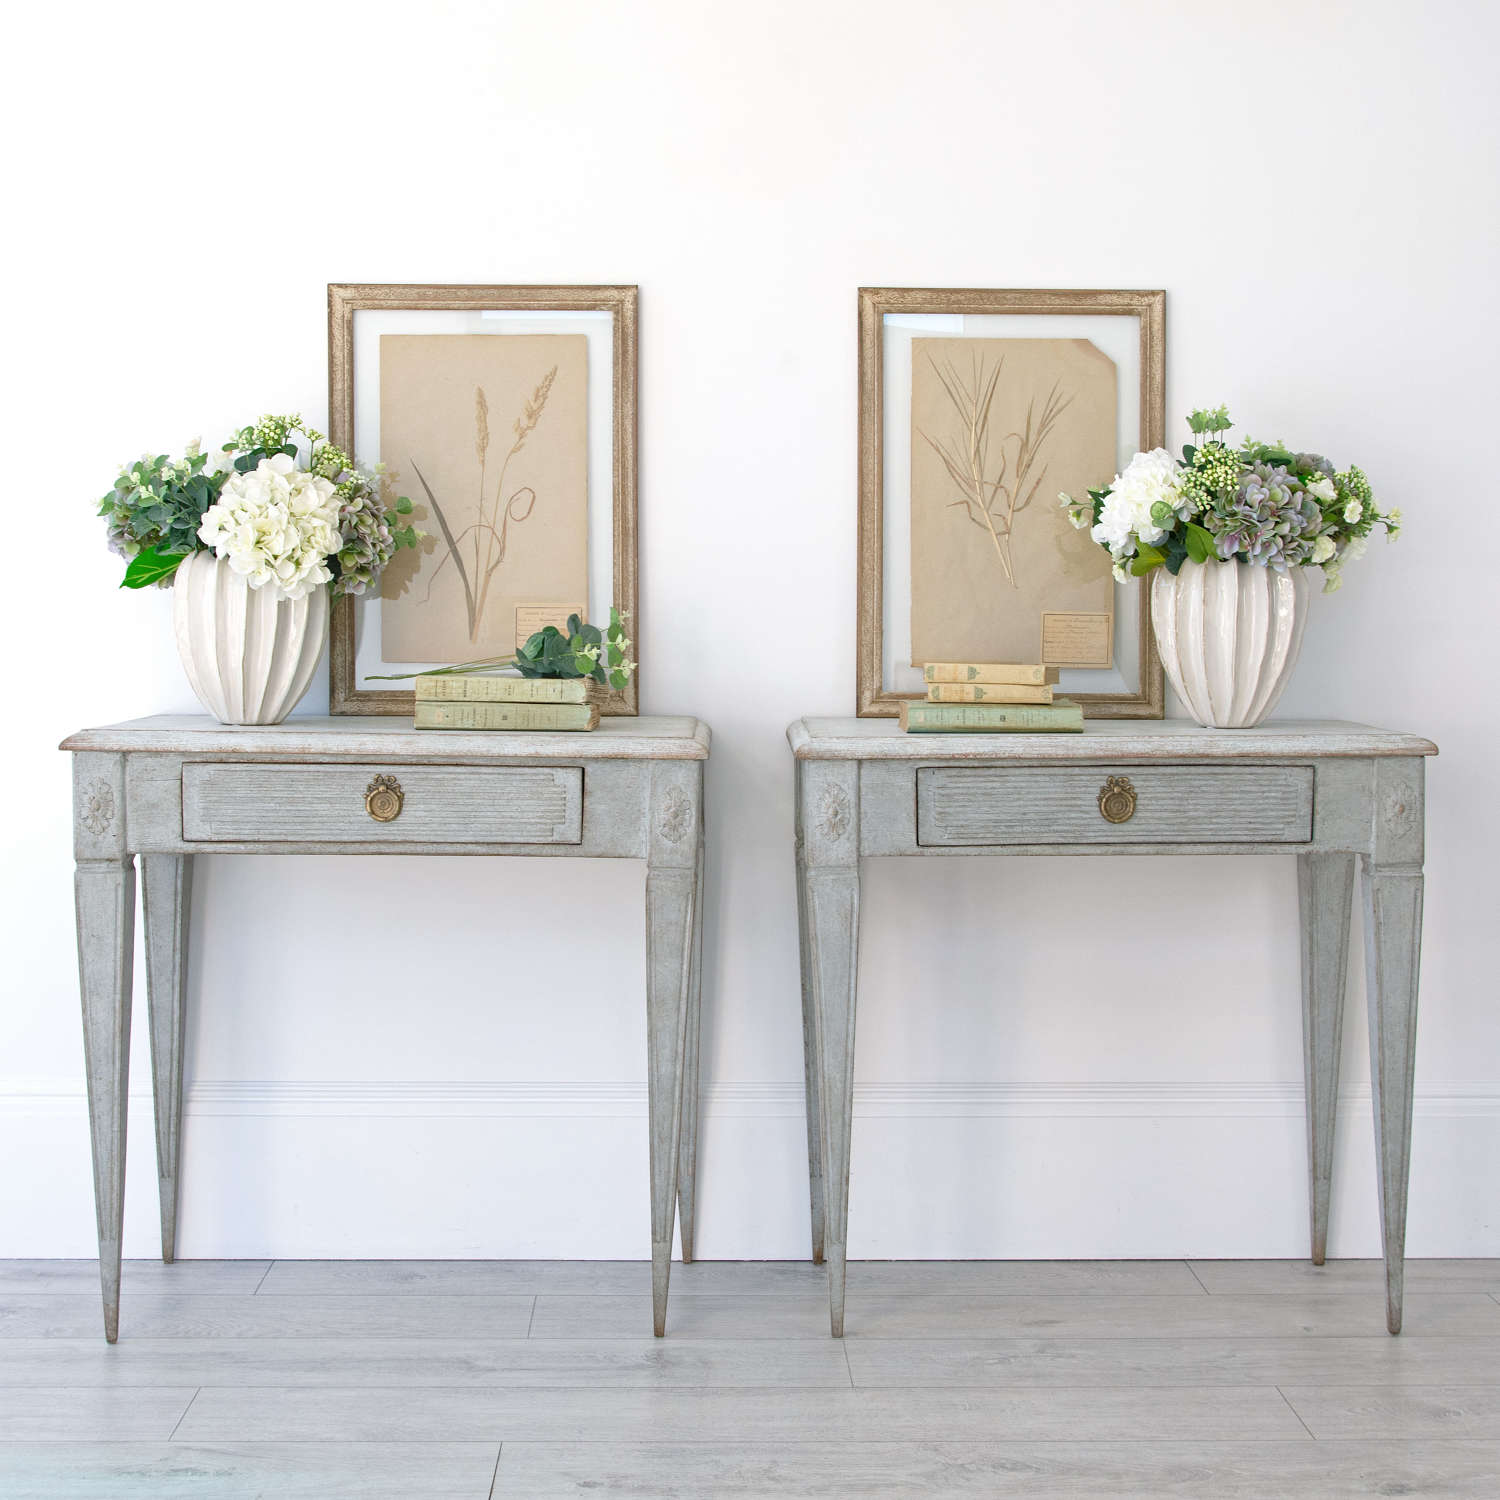 PAIR OF SWEDISH SIDE TABLES